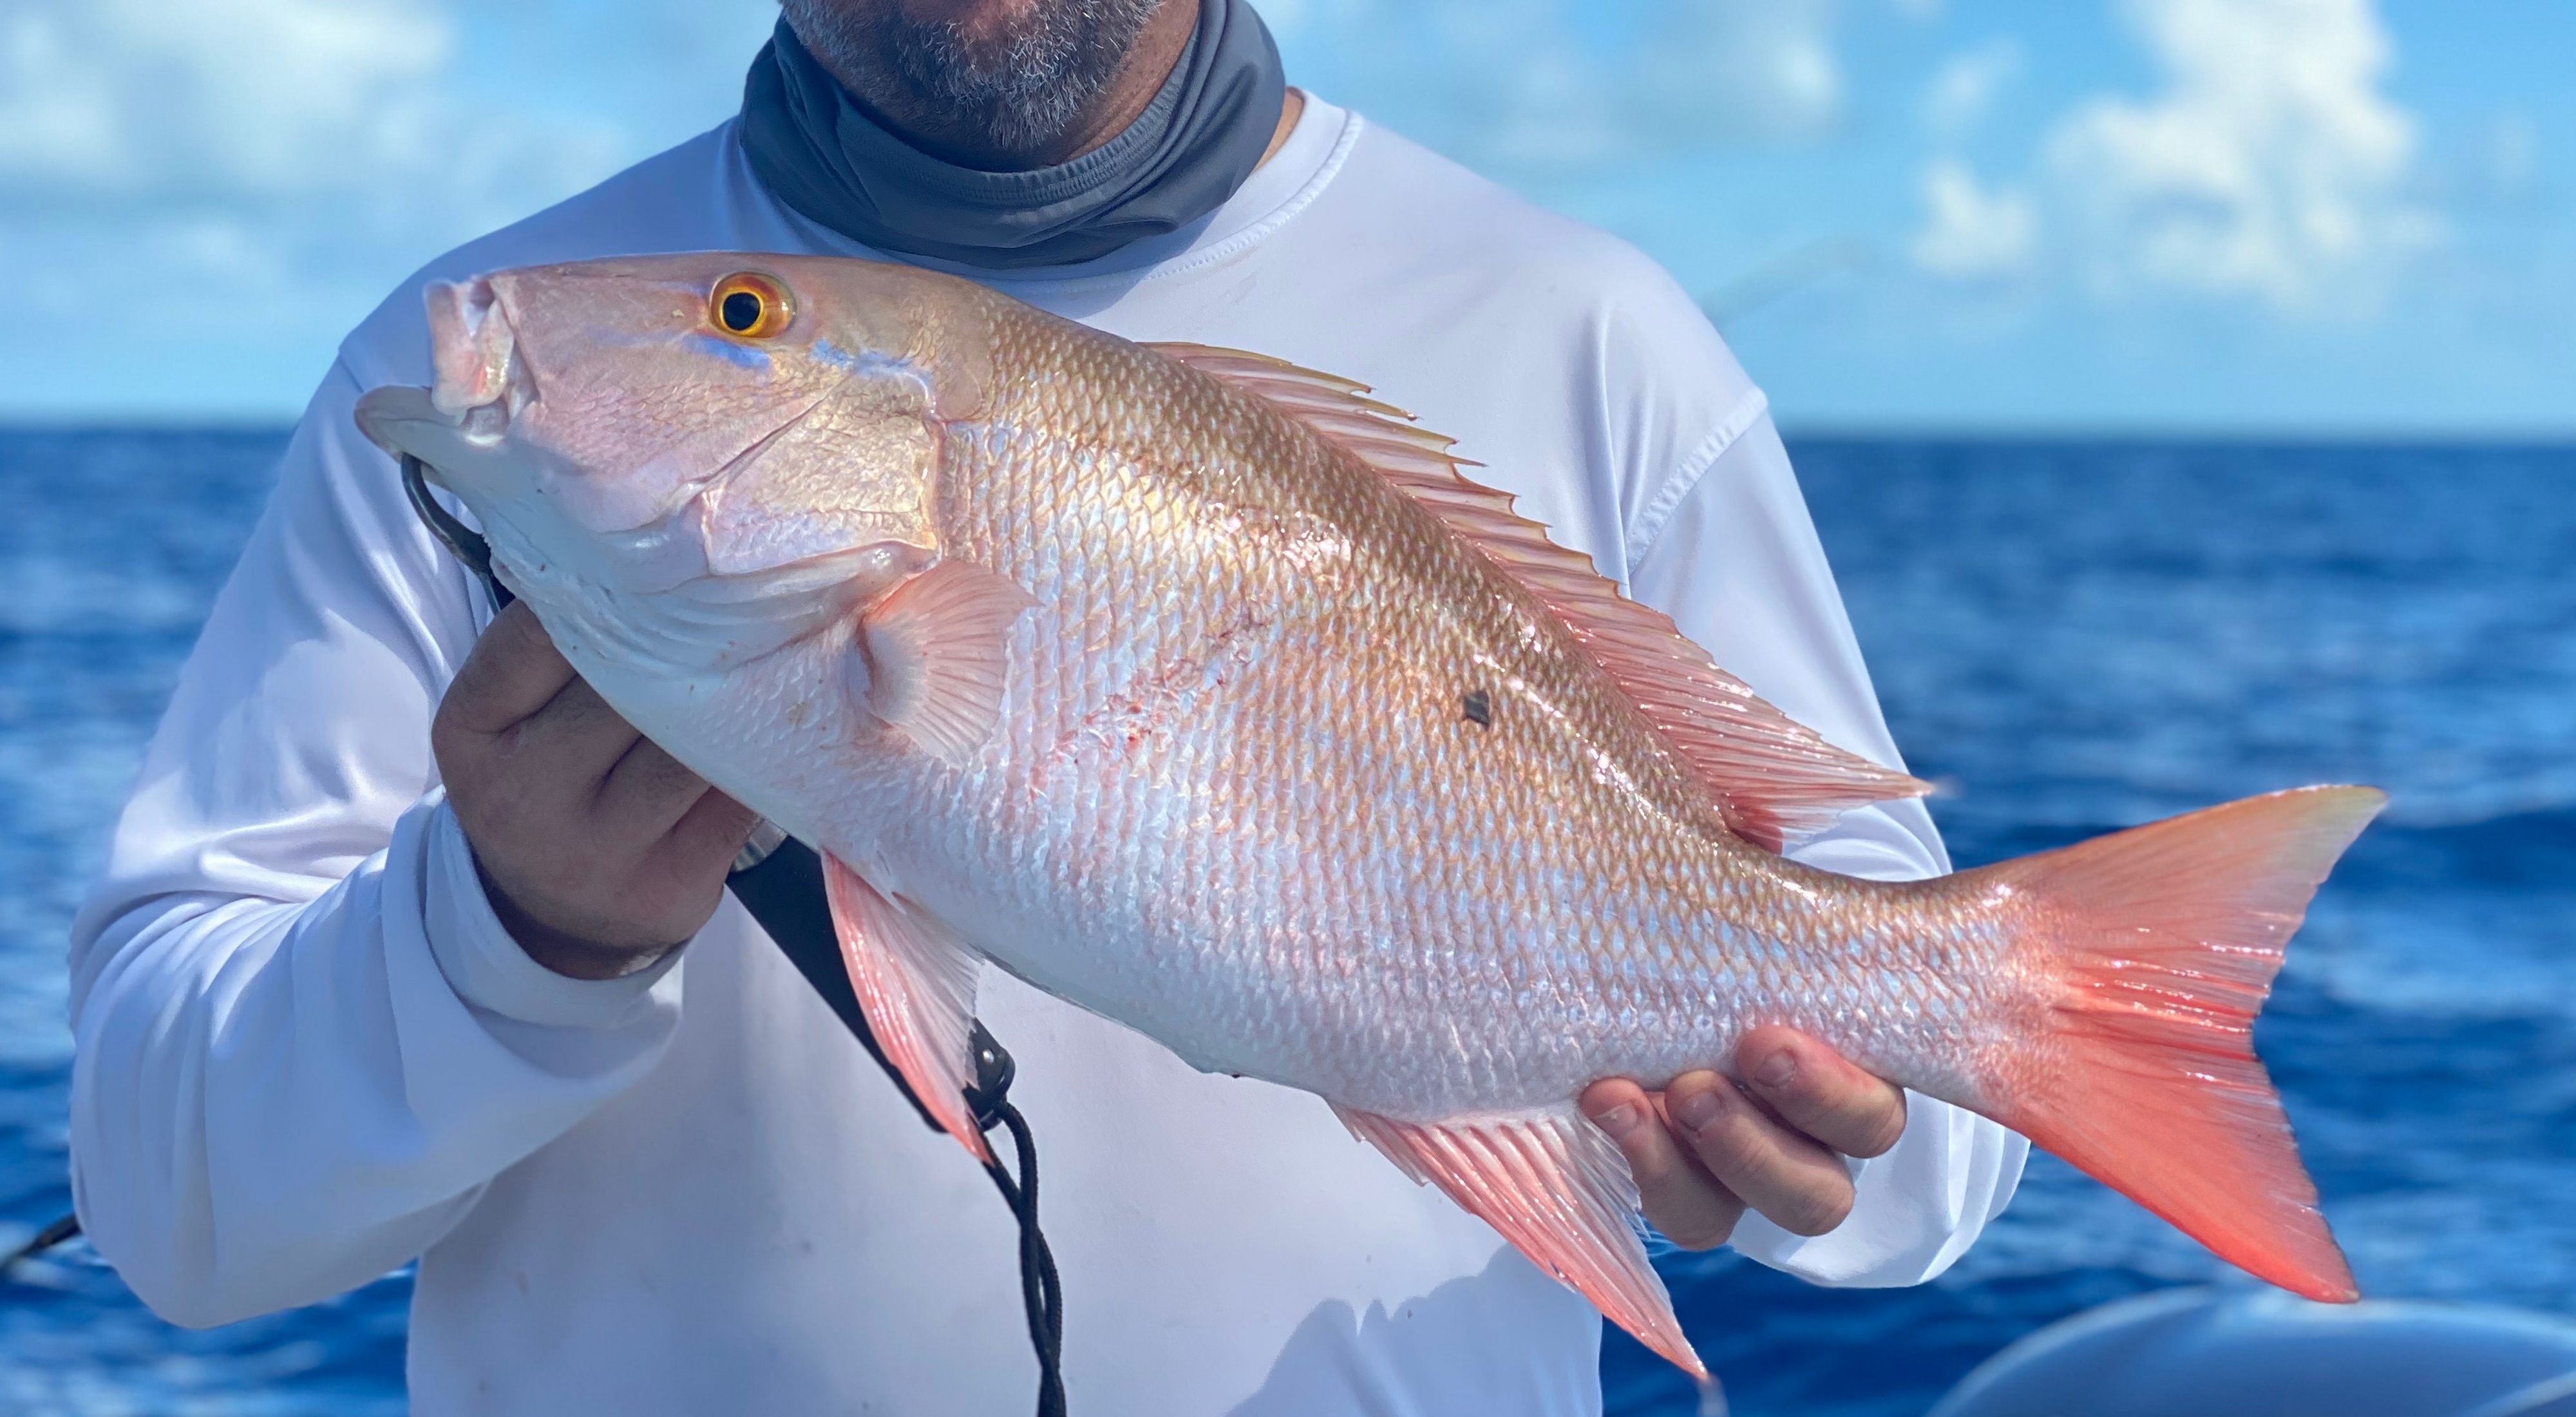 Fisherman on a boat holding up a pink and white mutton snapper fish.